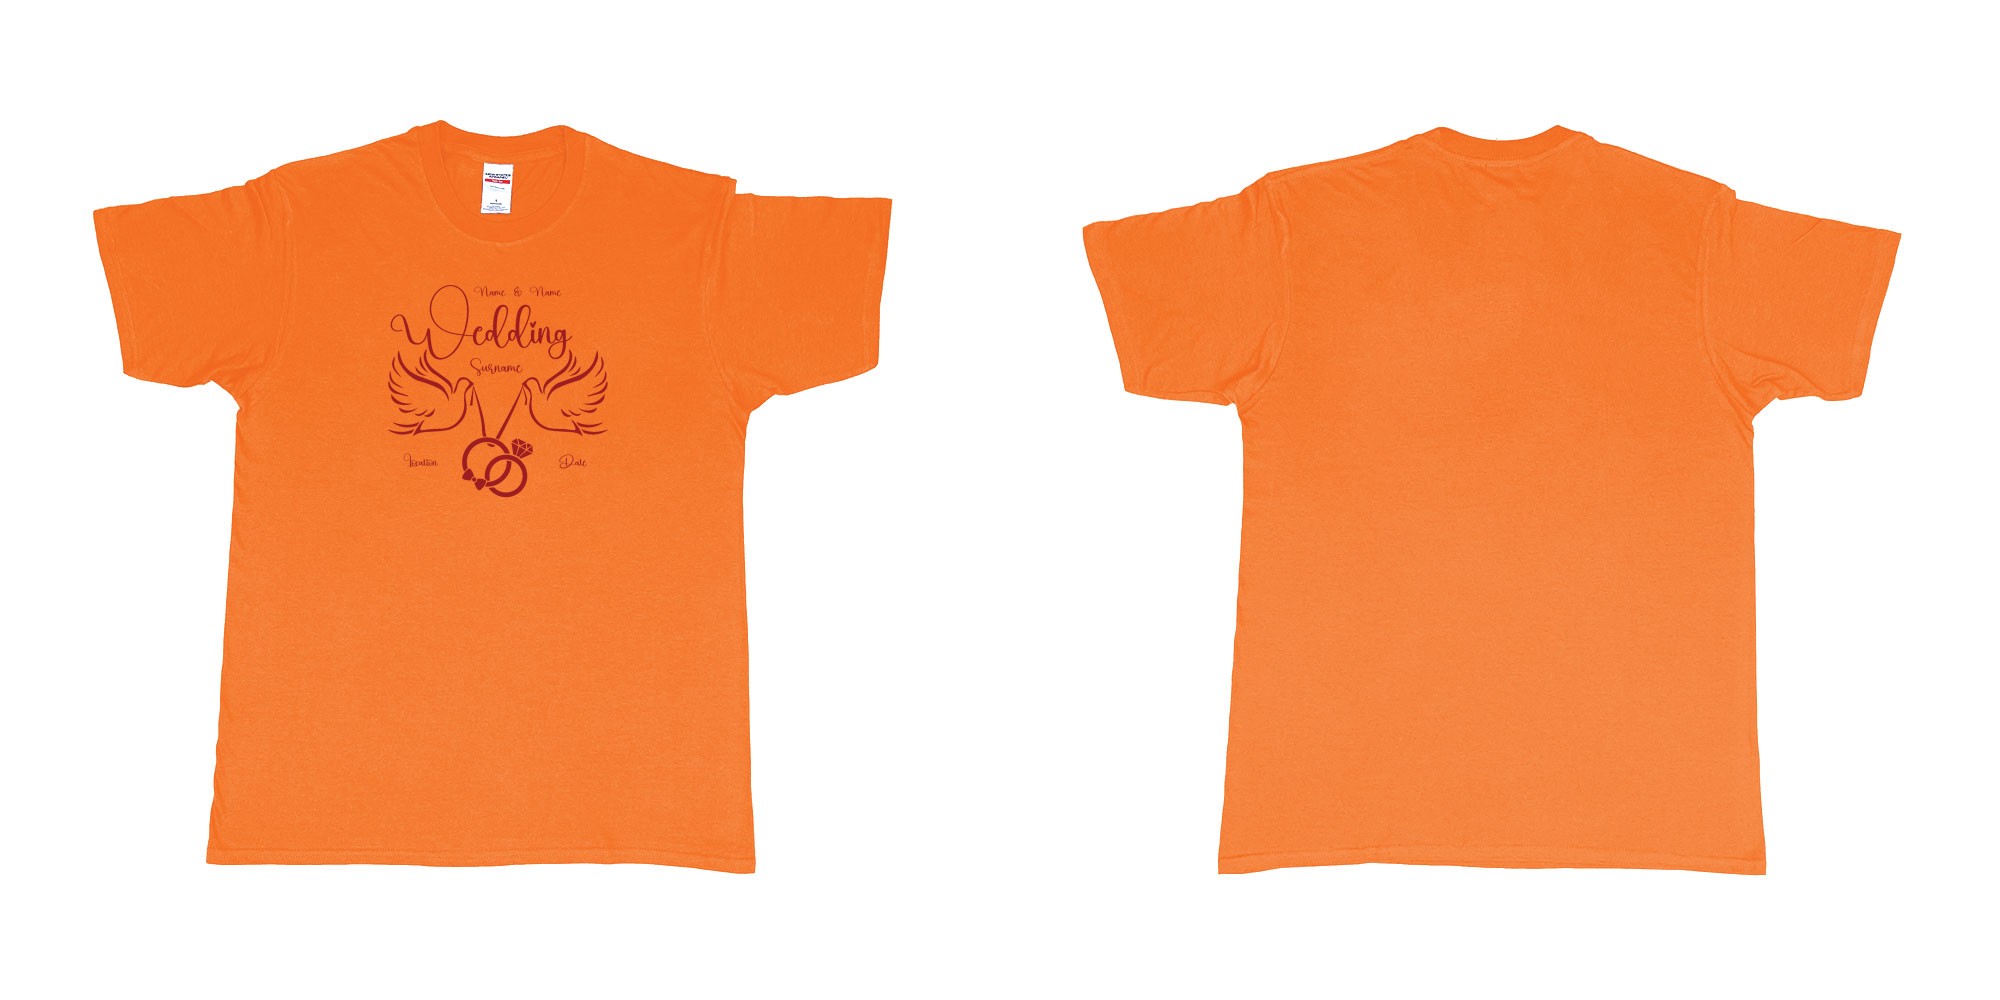 Custom tshirt design wedding doves holding rings in fabric color orange choice your own text made in Bali by The Pirate Way